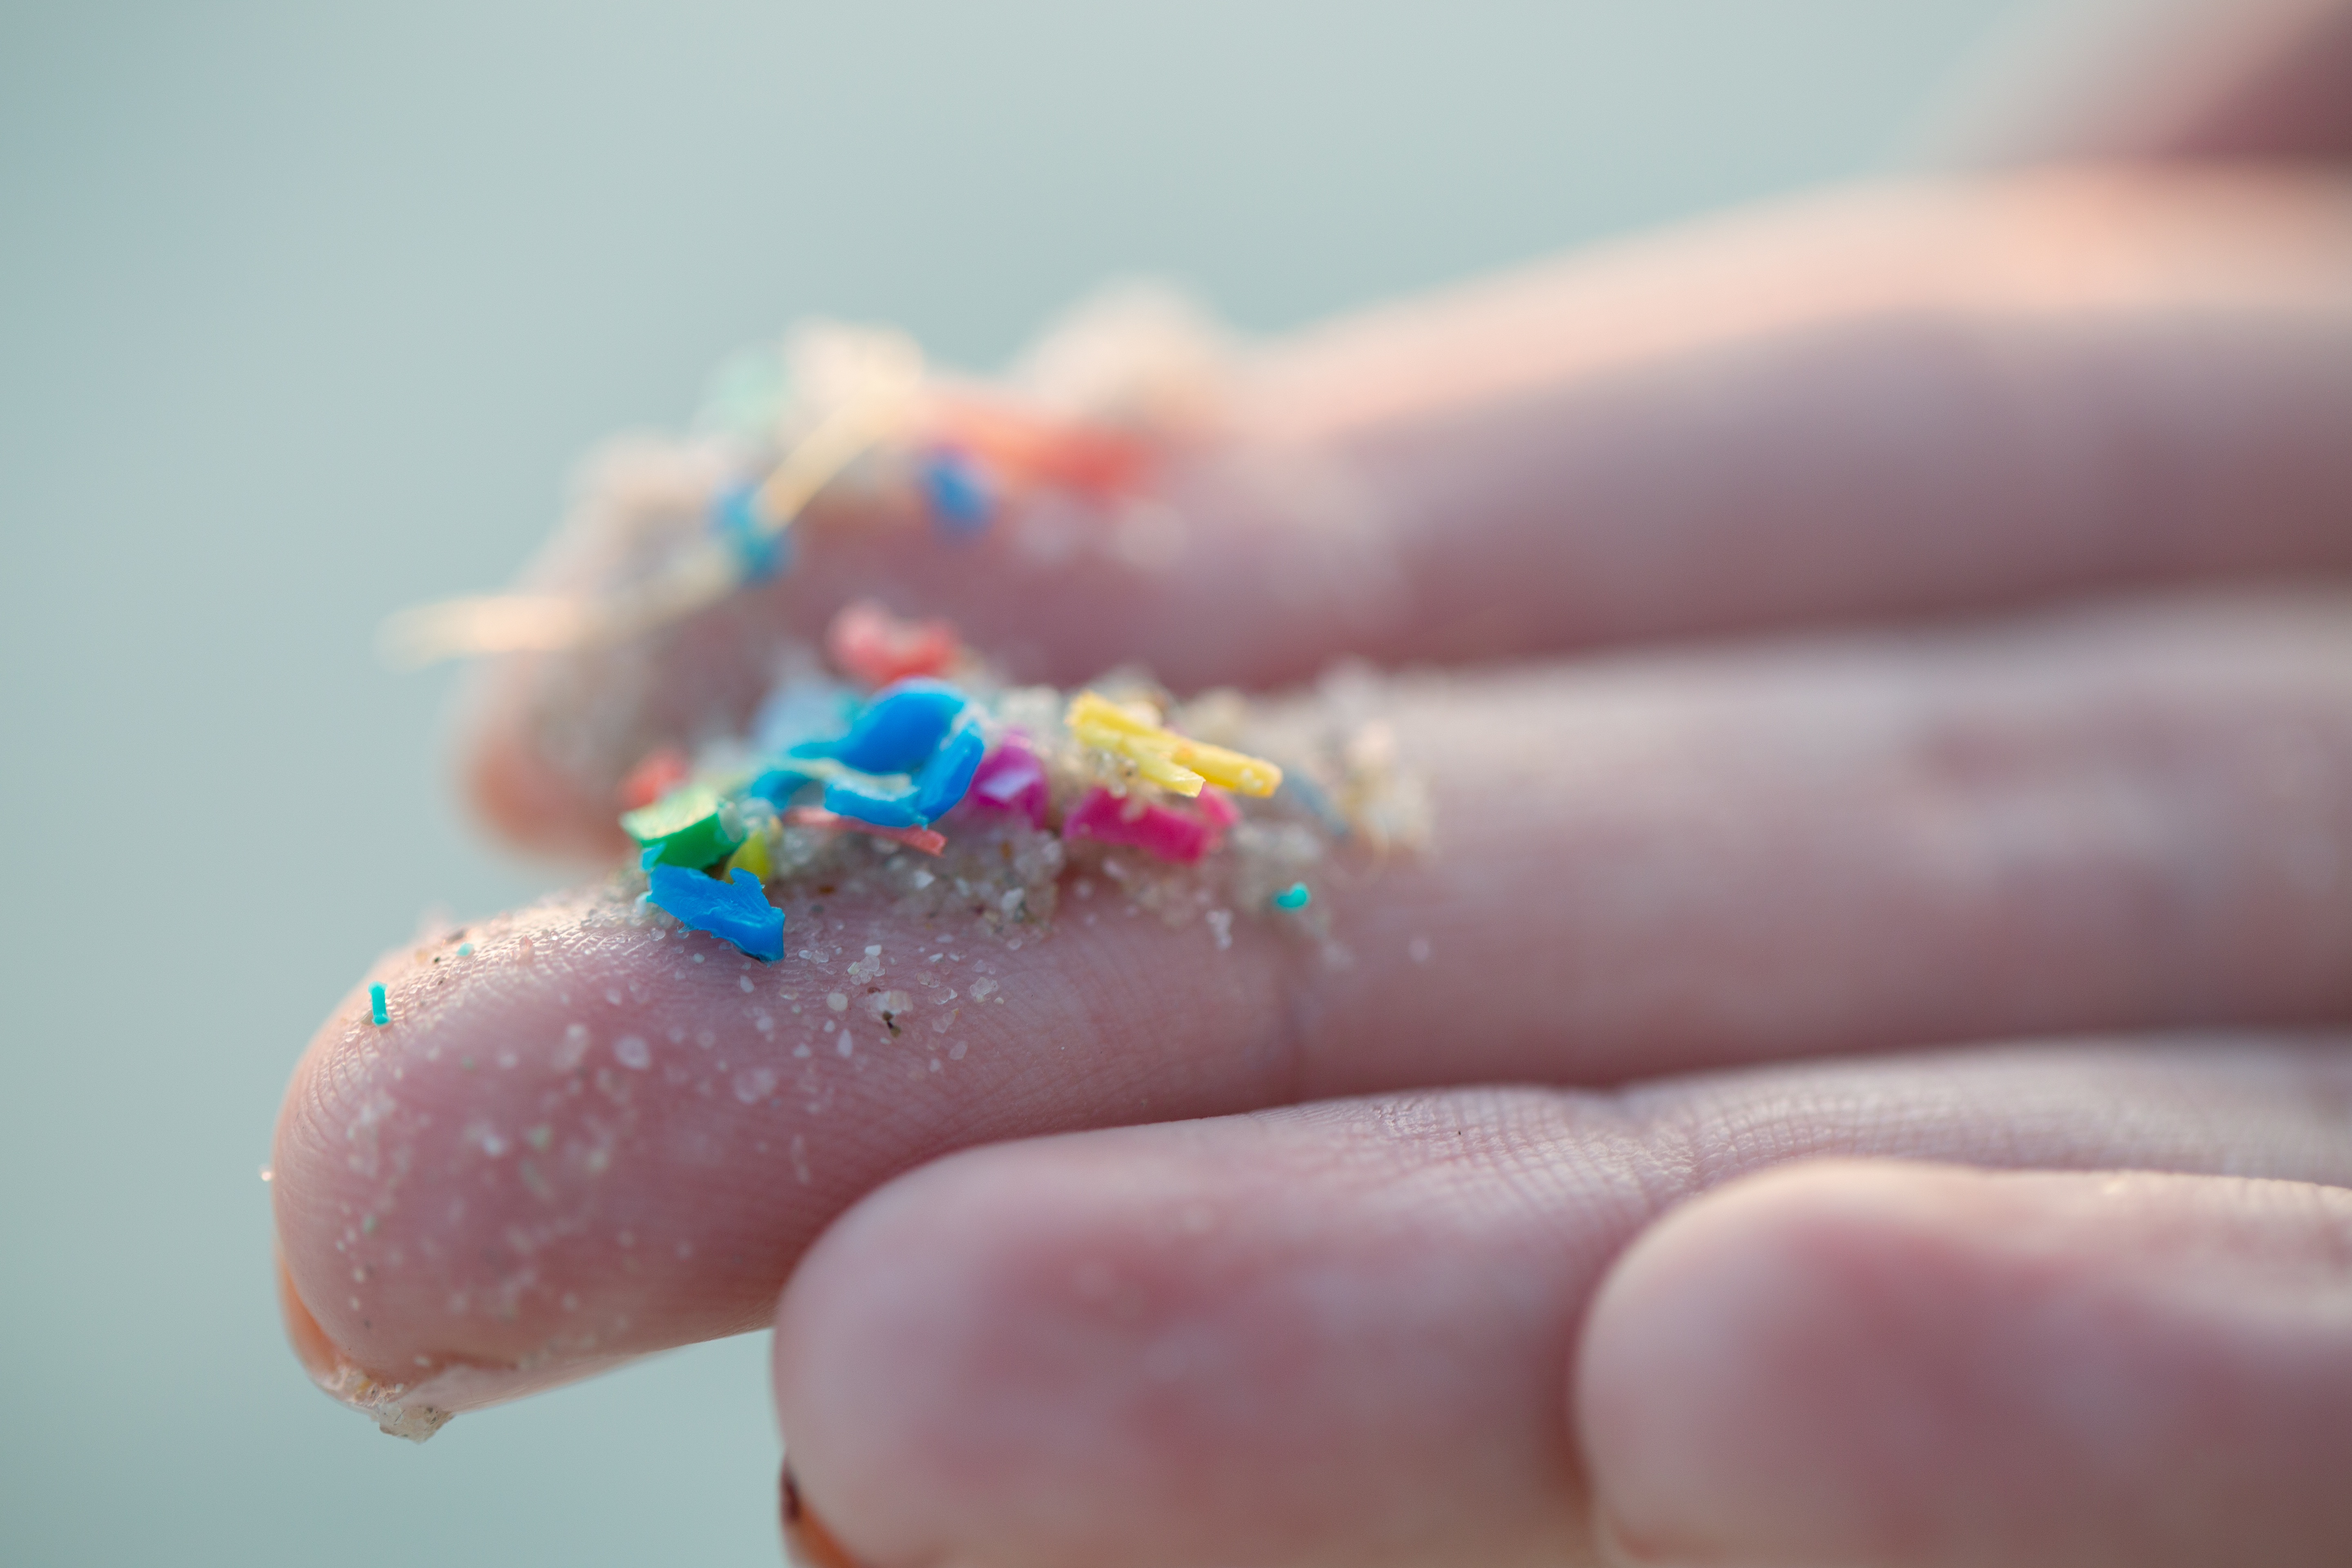 Are microplastics harmful? Health Canada funds research on potential risks